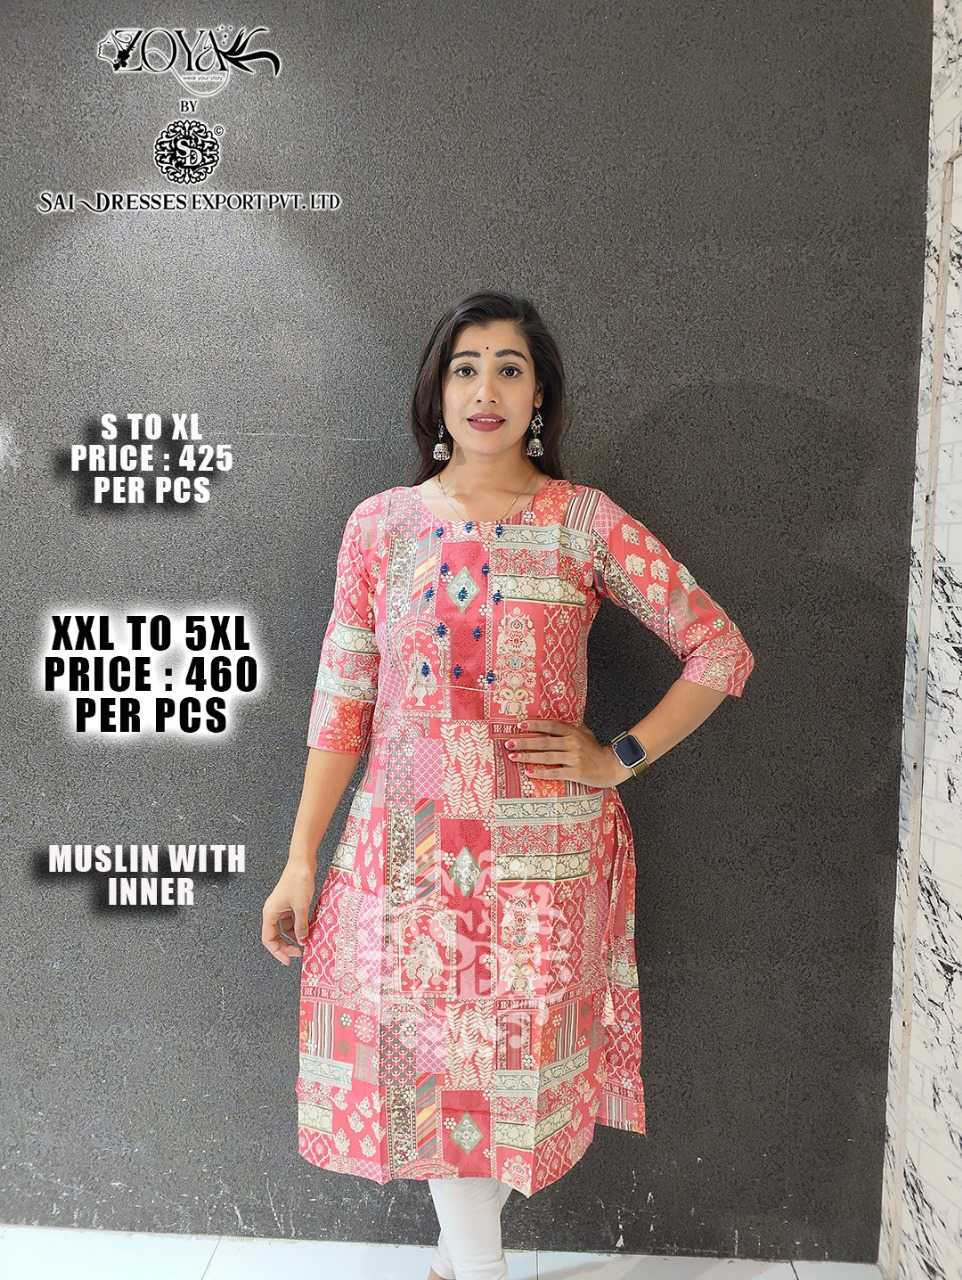 SAI DRESSES PRESENT D.NO SD84 READY TO WEAR BEAUTIFUL MUSLIN PRINTED STRAIGHT KURTI COMBO COLLECTION IN WHOLESALE RATE IN SURAT